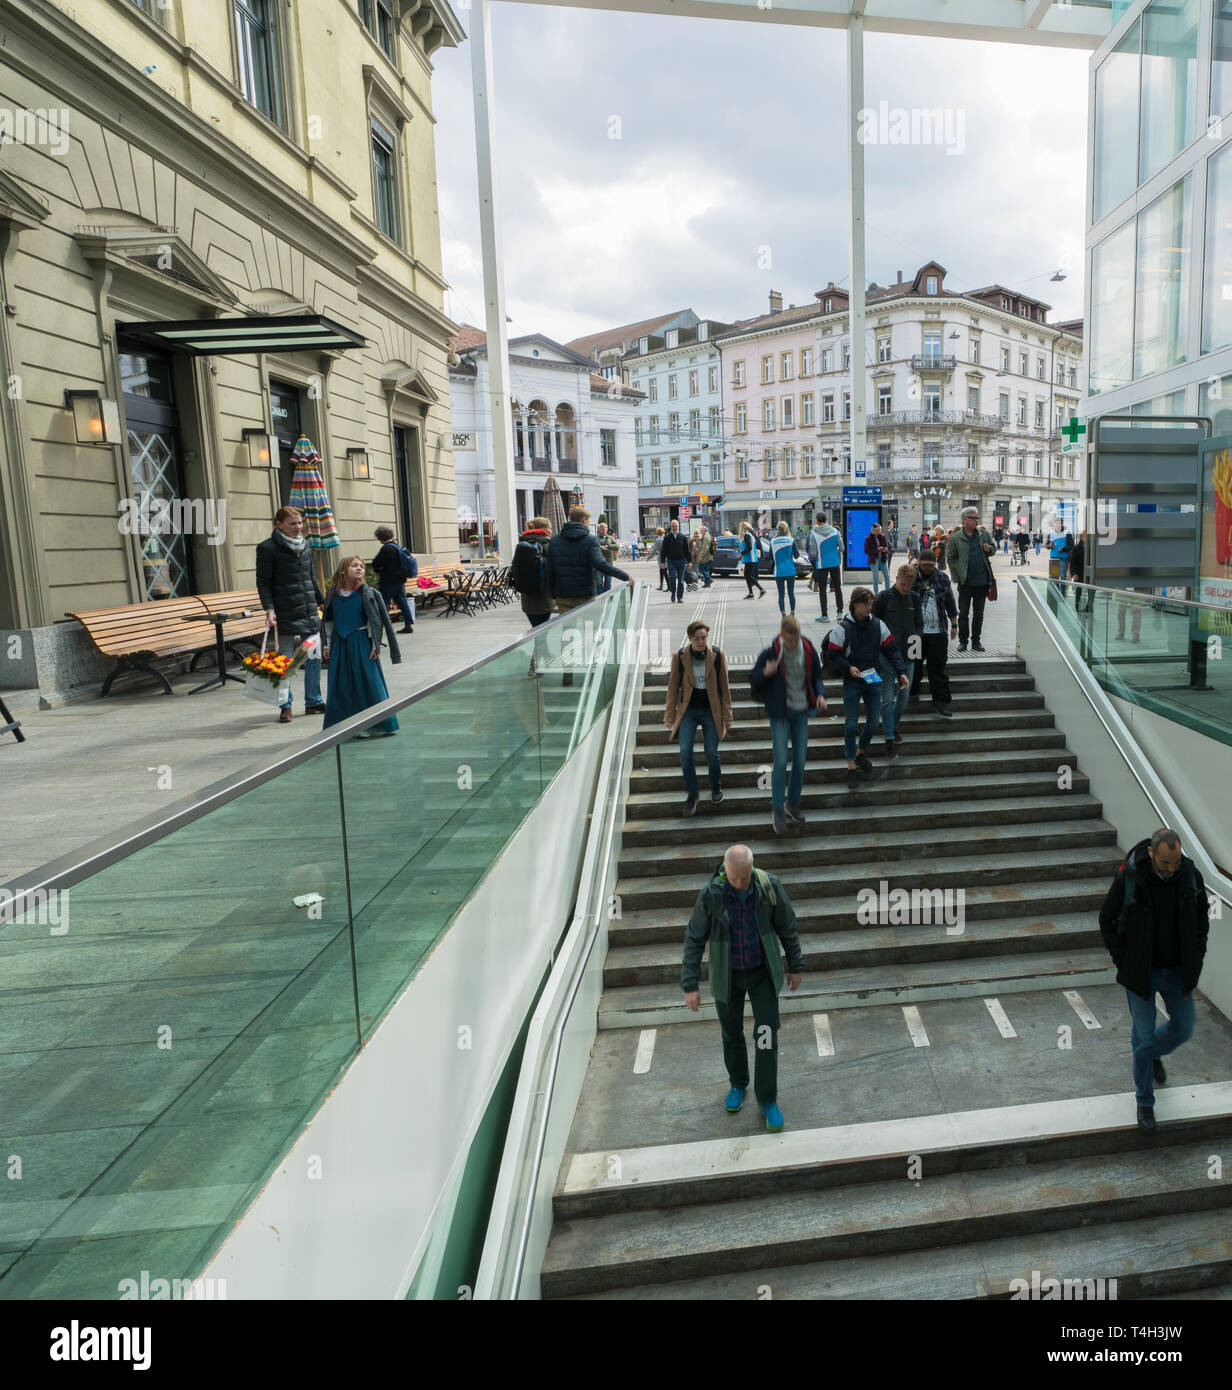 Winterthur, ZH / Switzerland - April 8, 2019:  Winterthur train station and trains leaving with commuters and people hurrying to their trains Stock Photo